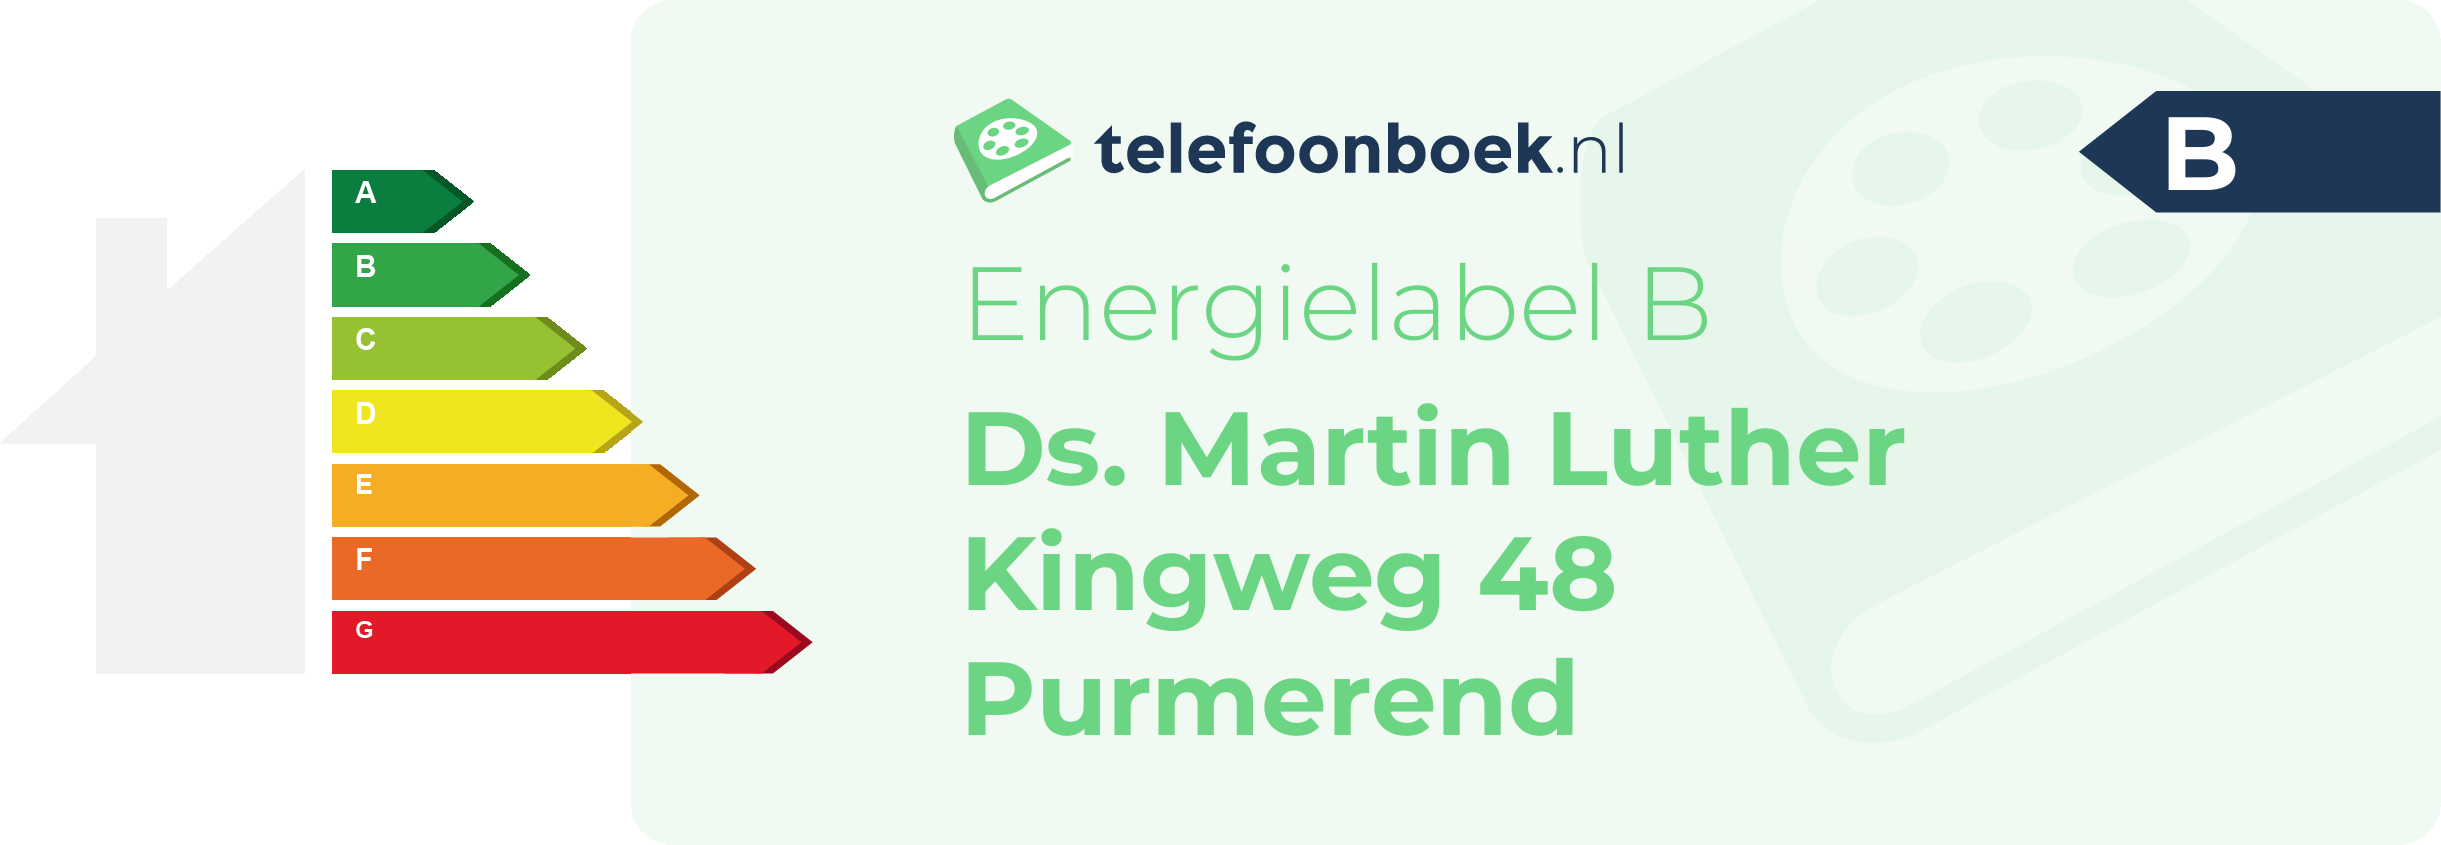 Energielabel Ds. Martin Luther Kingweg 48 Purmerend